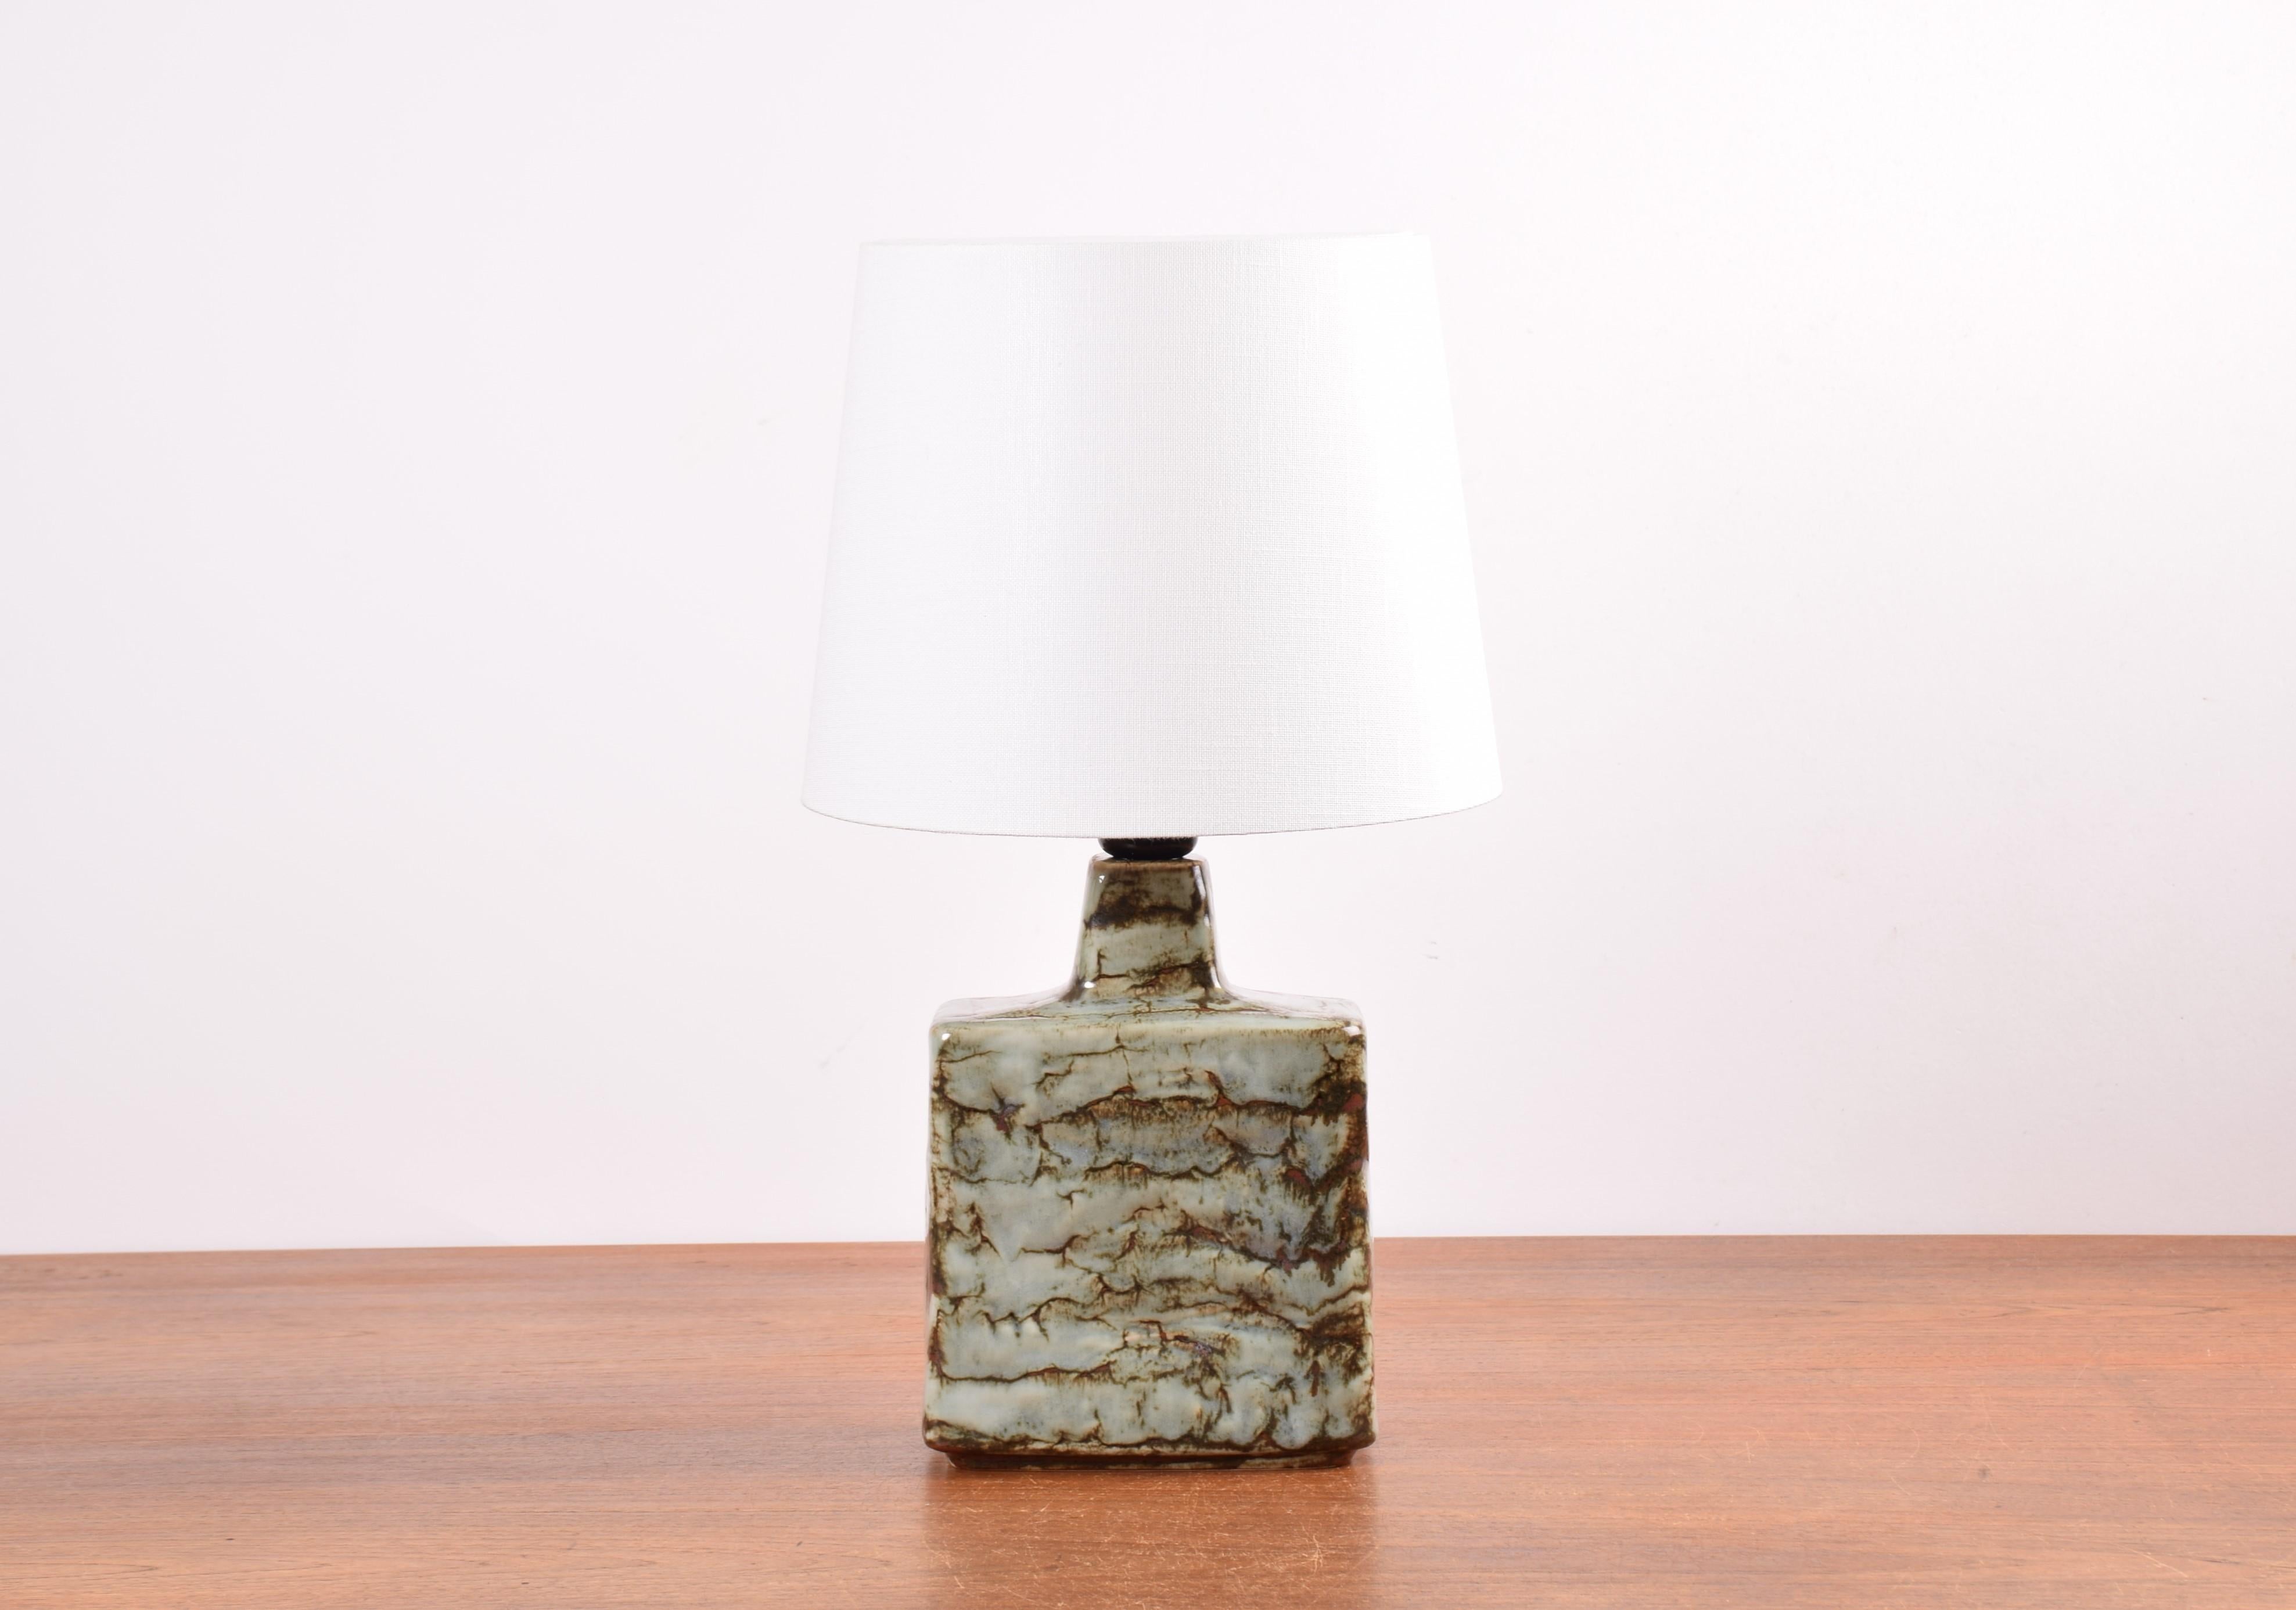 Midcentury Danish ceramic table lamp from stoneware manufacturer Desiree Stentøj, made circa 1970s.
It is inspired by the Brutalist style with its simple geometric shape, great glaze expression and the structured, tactile surface.

On verso